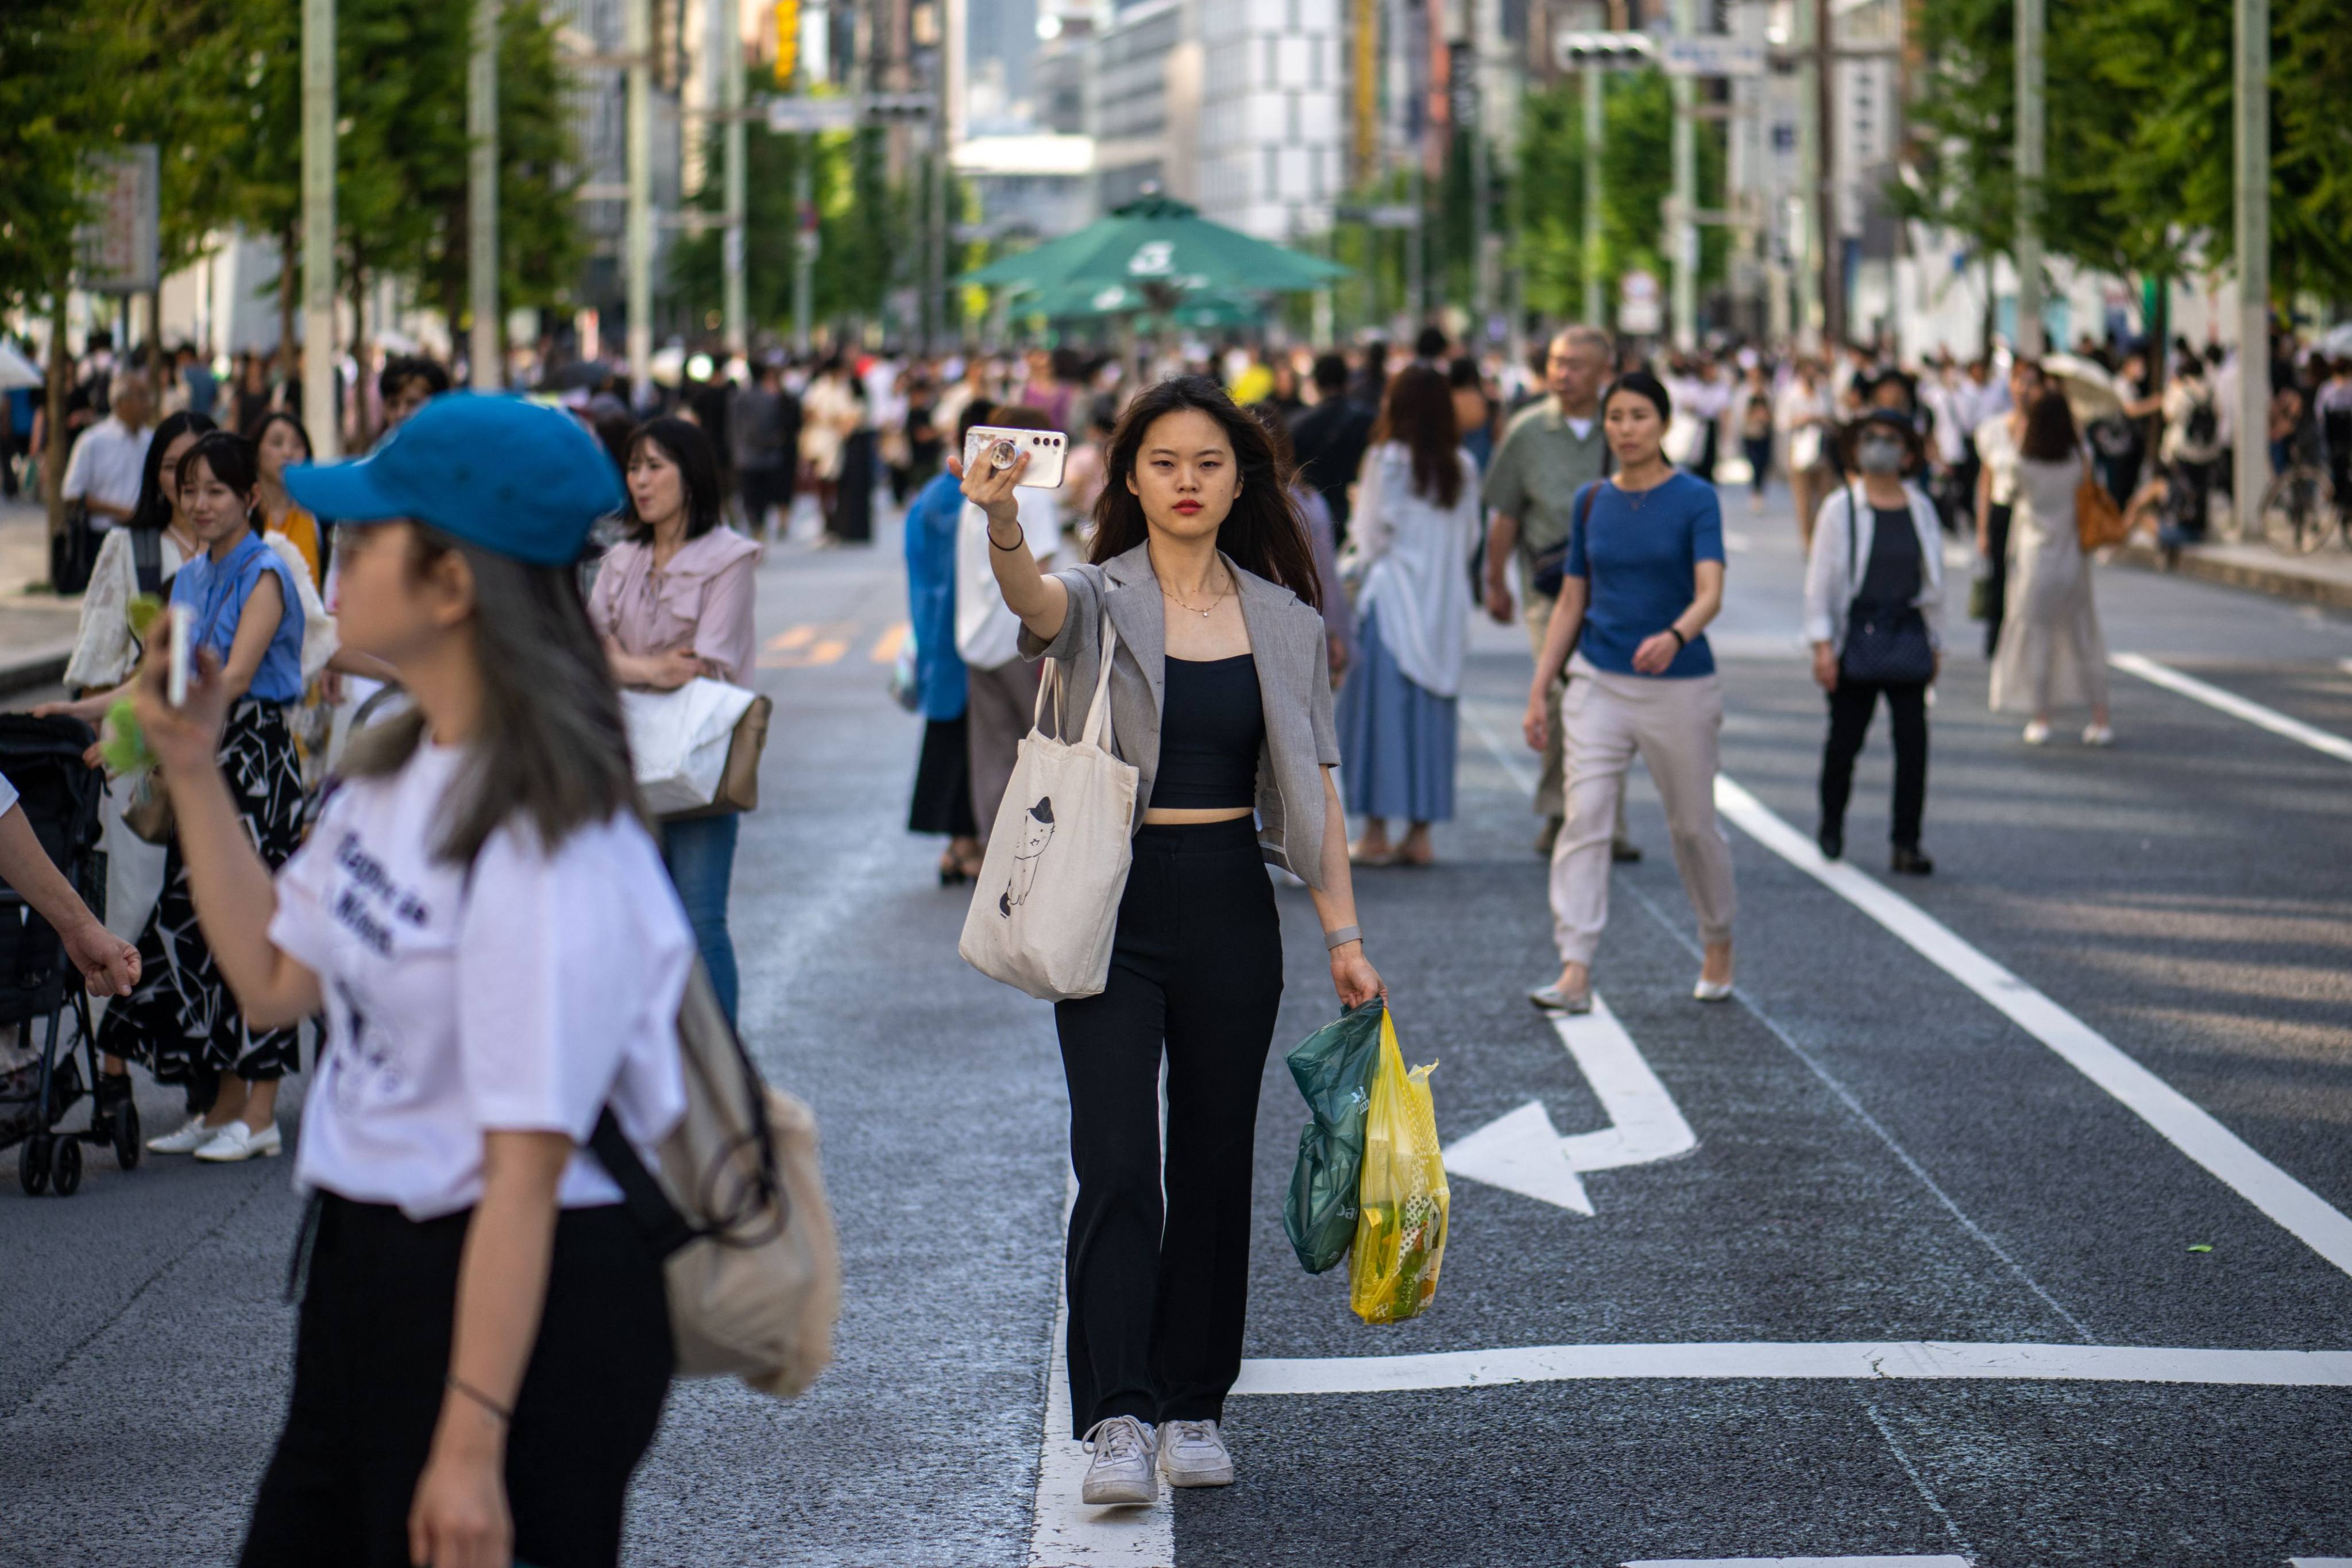 Pedestrians walk through the Ginza district of Tokyo on June 17. Buyers get more bang for their buck in Japan’s capital, compared with Hong Kong, Singapore, London and New York. Photo AFP